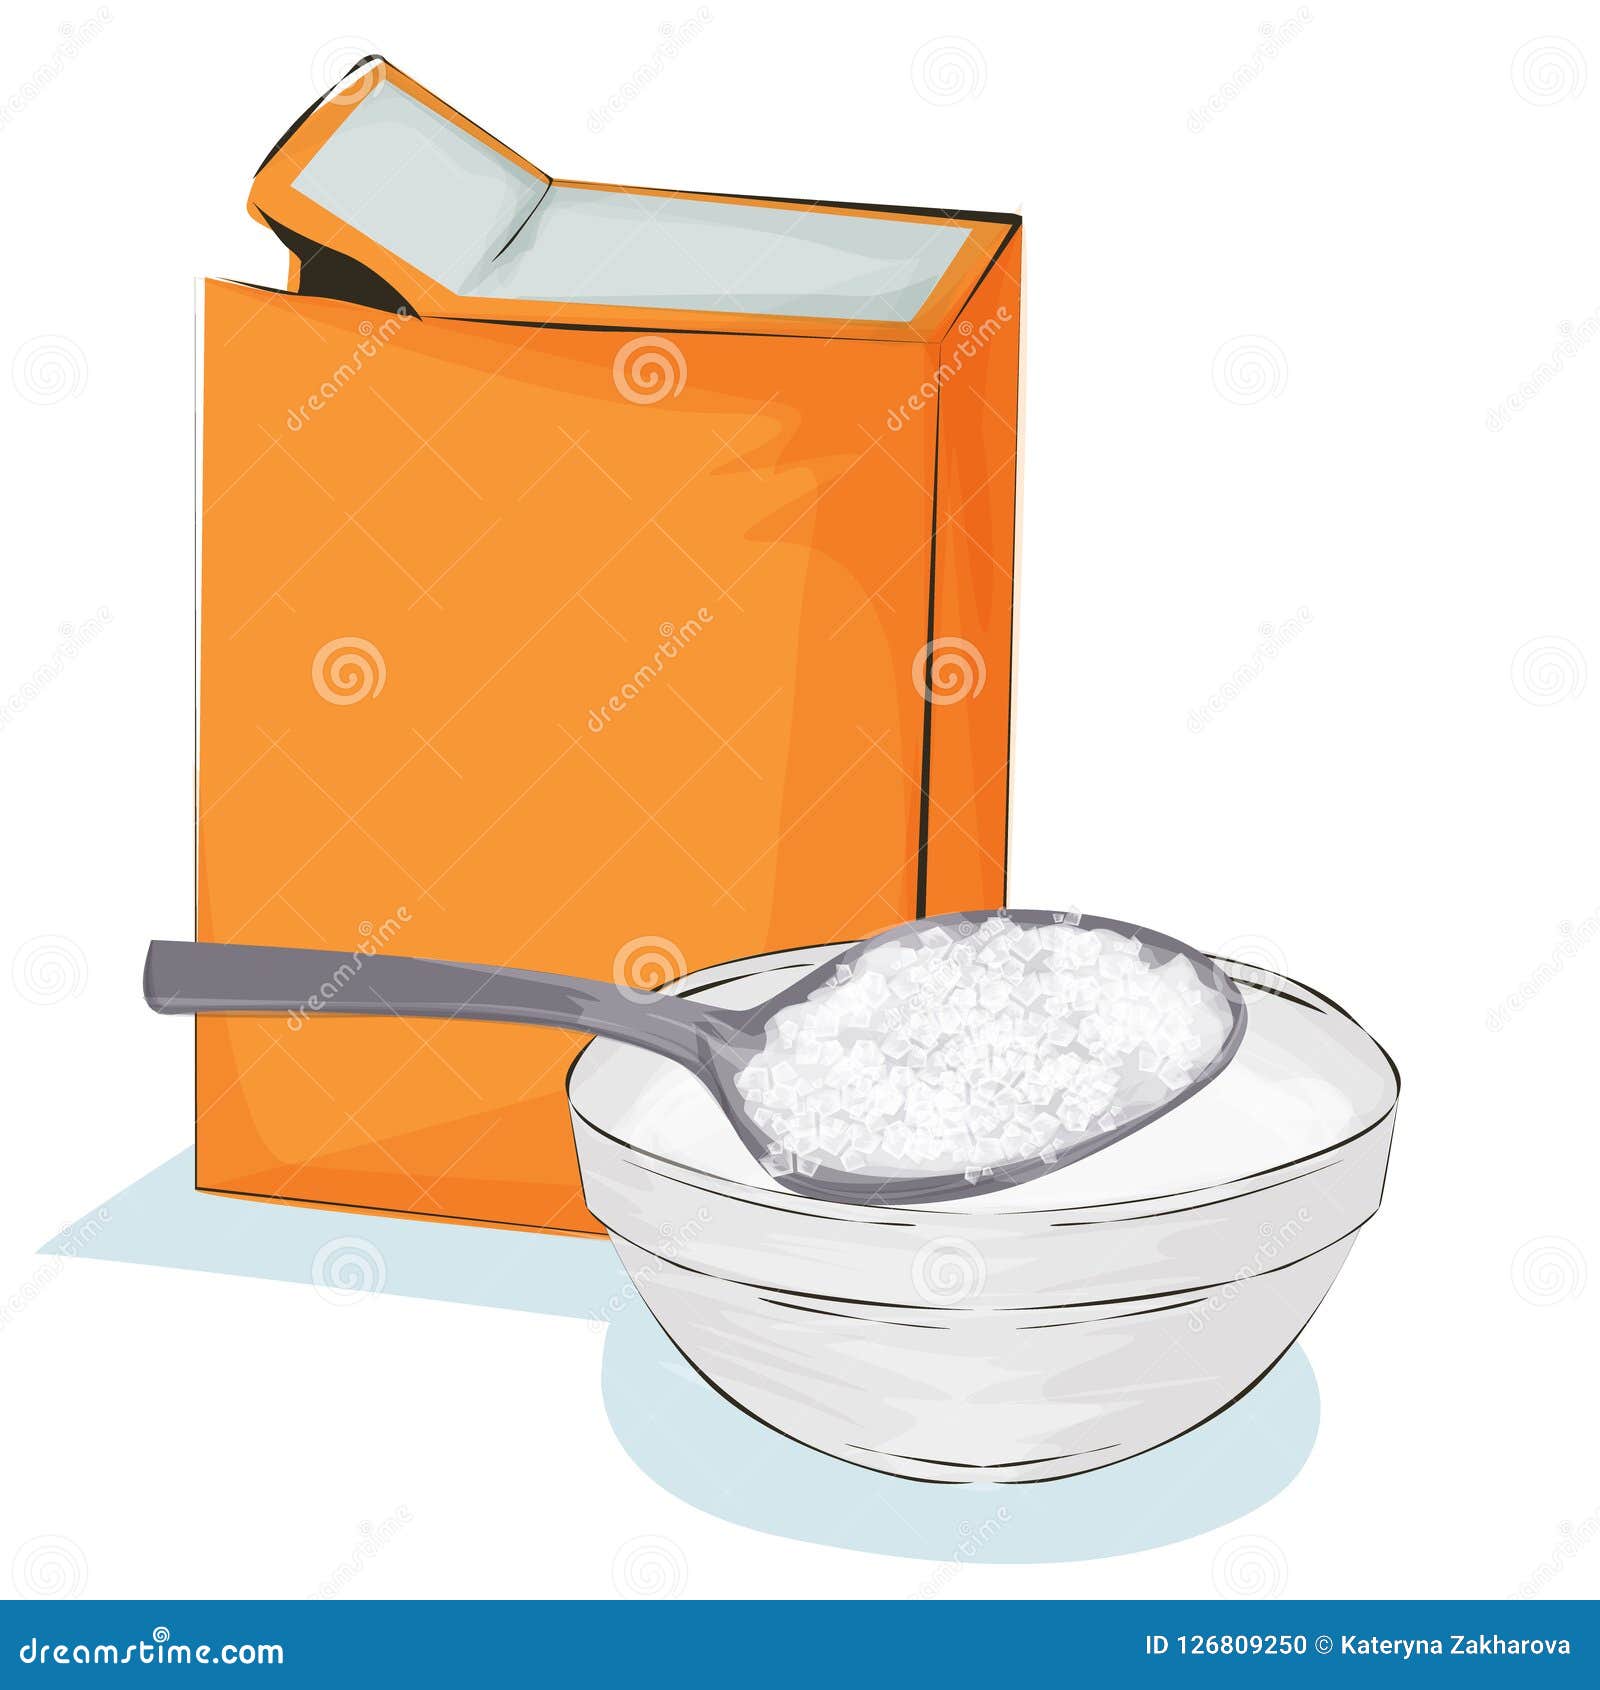 Soda In A Craft Paper Bag And Spoon, Baking Ingredient Illustration On